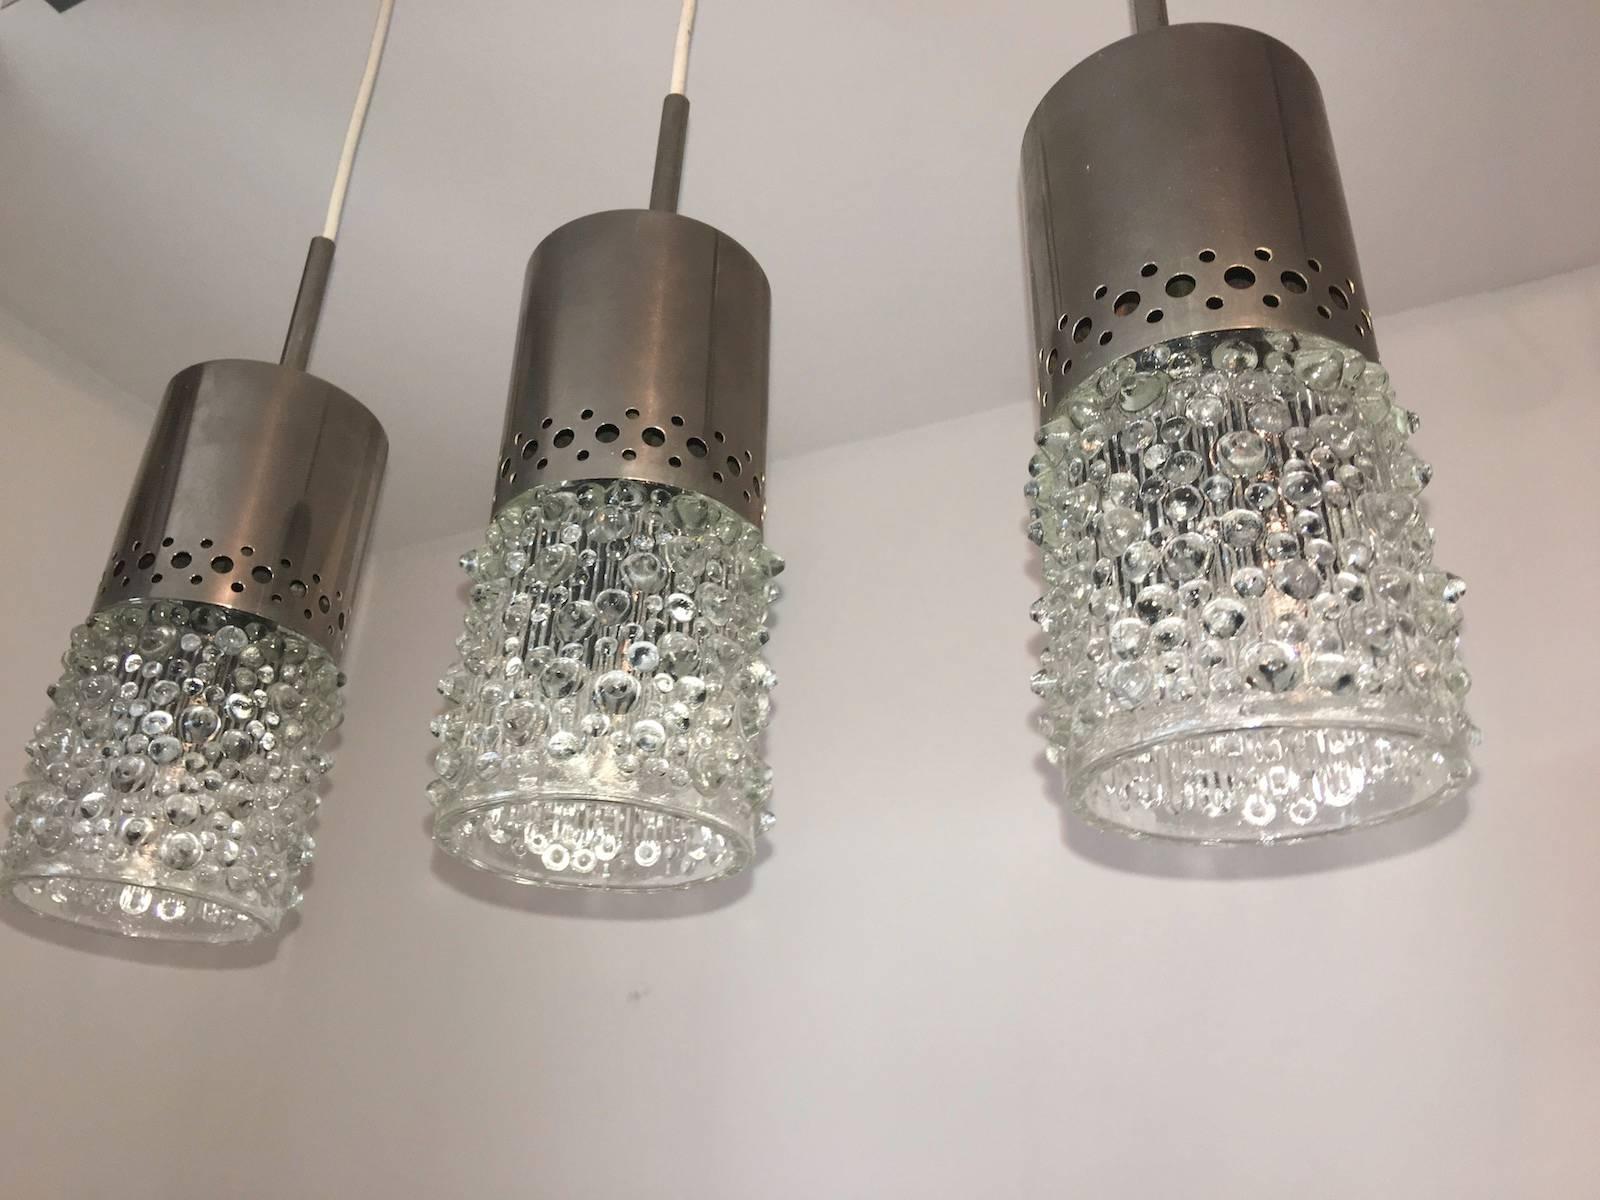 Set of Three Bubble Glass Pendant Lamp In Good Condition For Sale In Frisco, TX